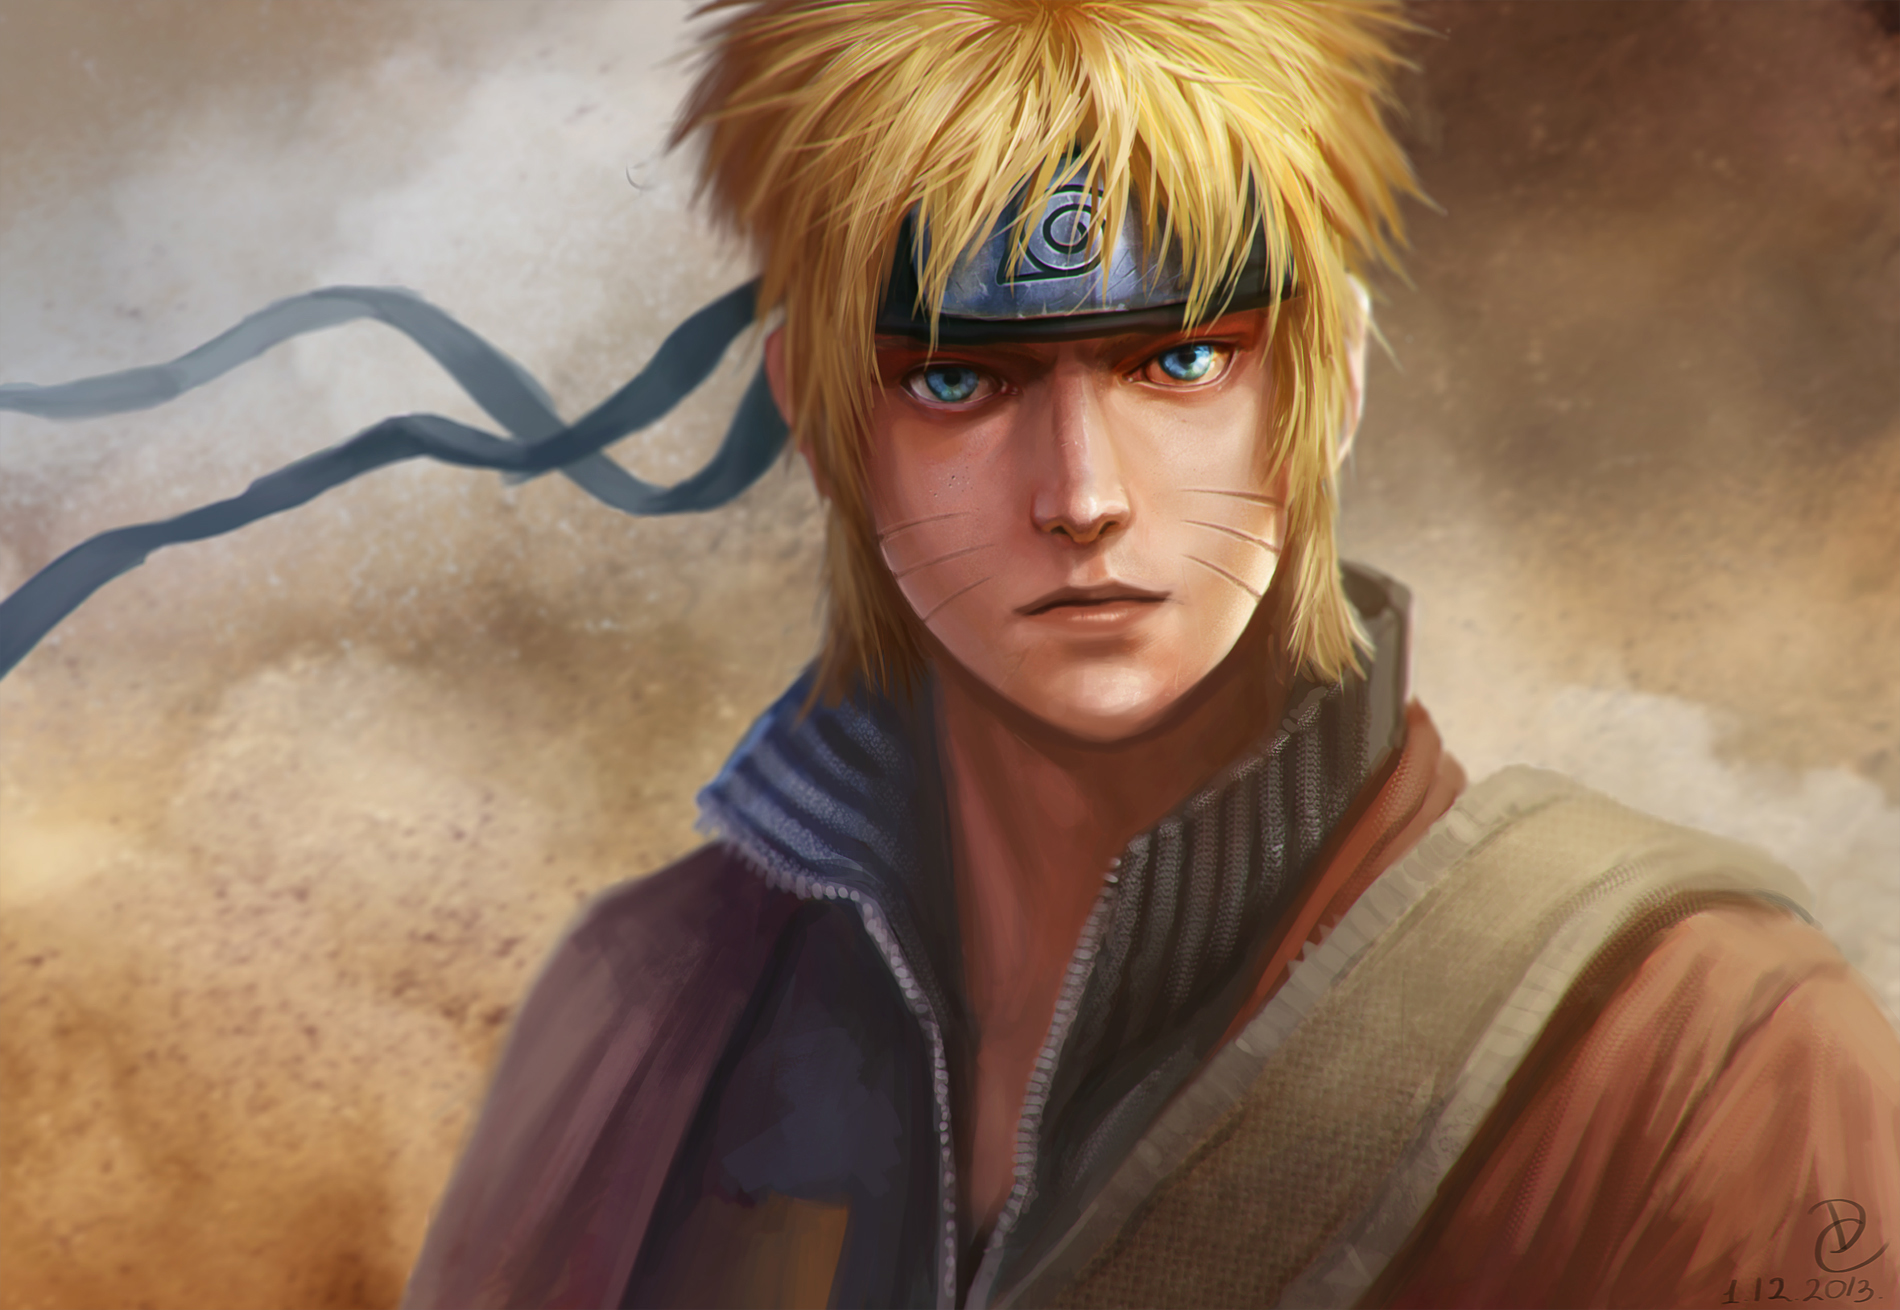 Naruto Wallpaper and Background Image | 1900x1310 - Wallpaper Abyss